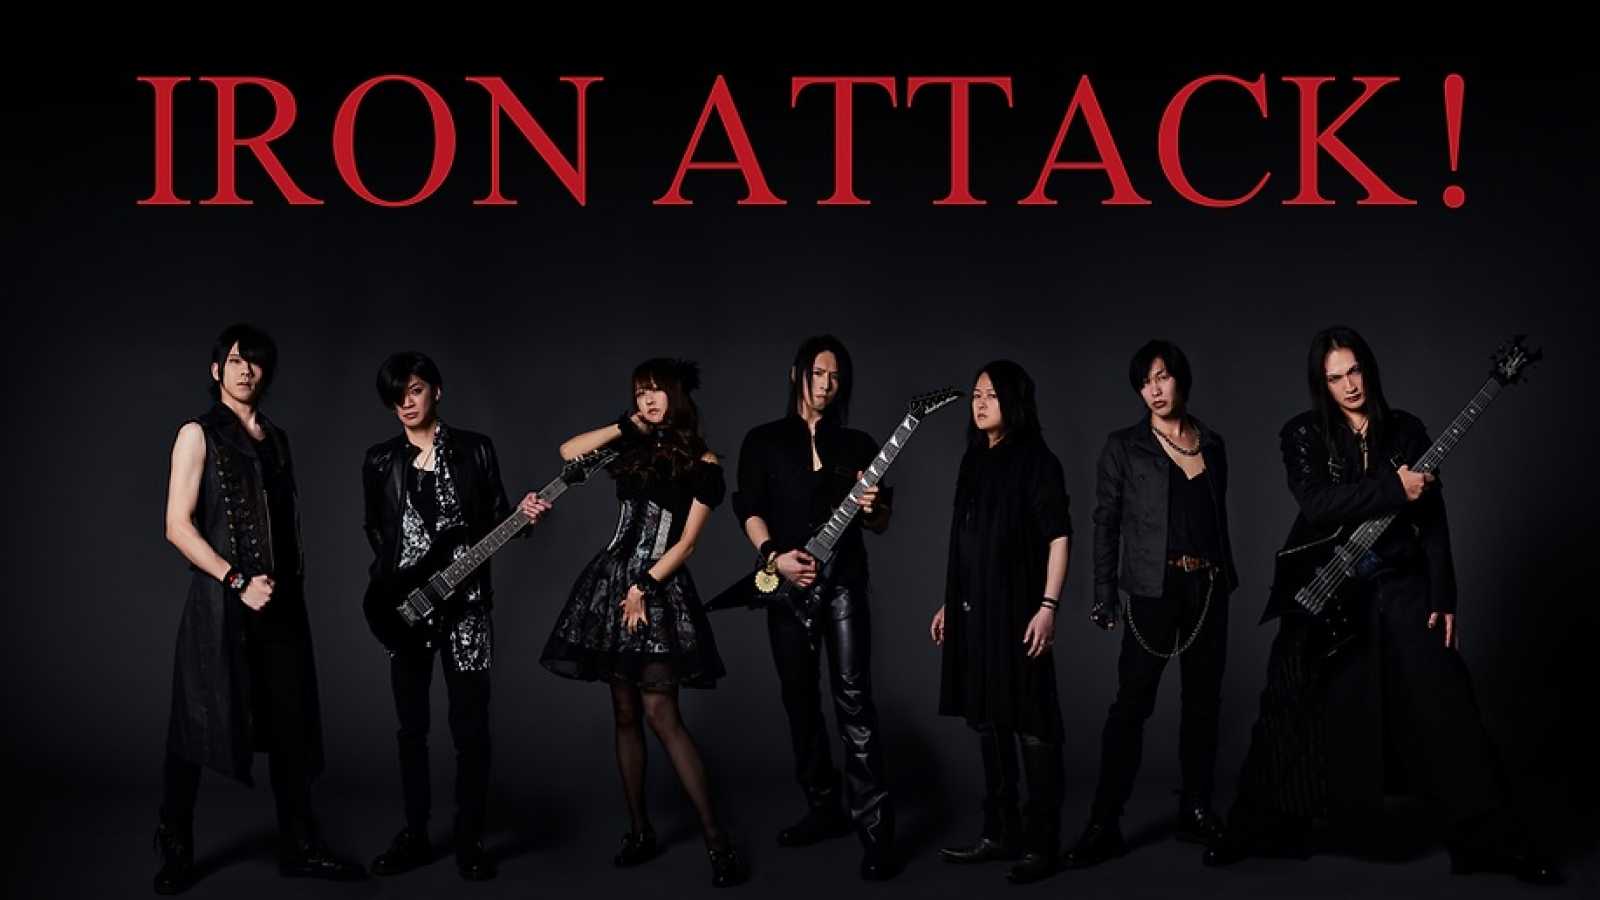 New Album from IRON ATTACK! © IRON ATTACK!. All rights reserved.